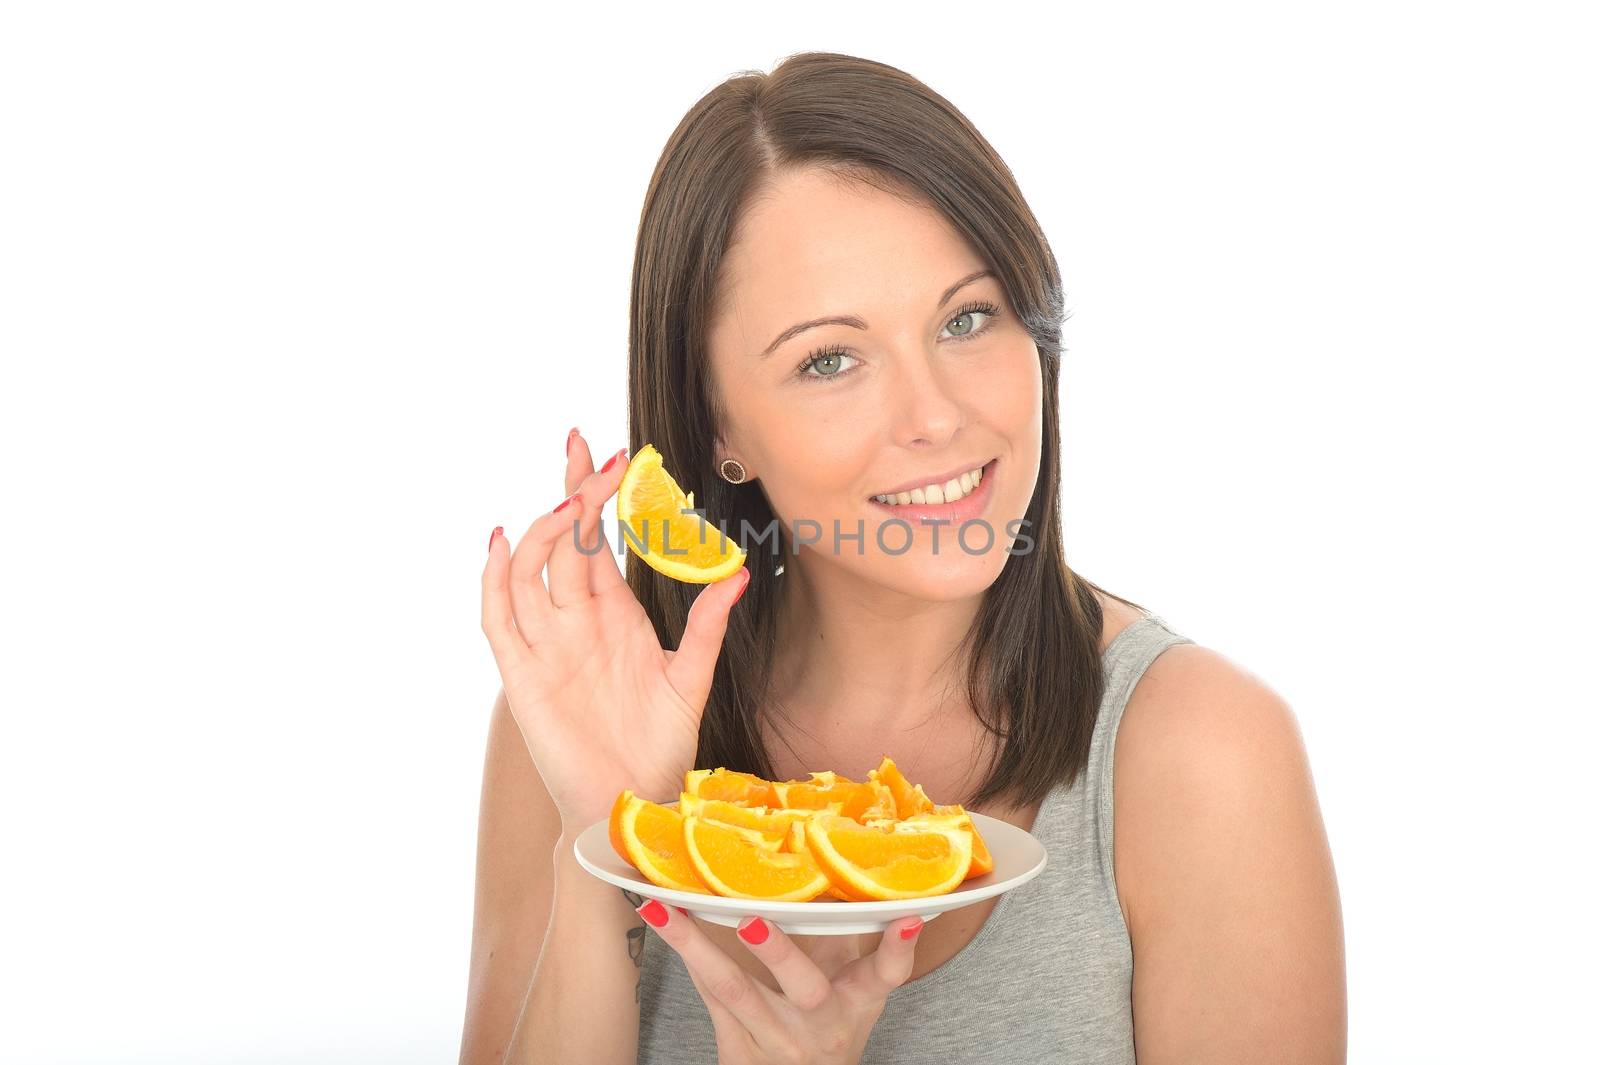 Attractive Young Woman Holding a Plate of Sliced Oranges by Whiteboxmedia